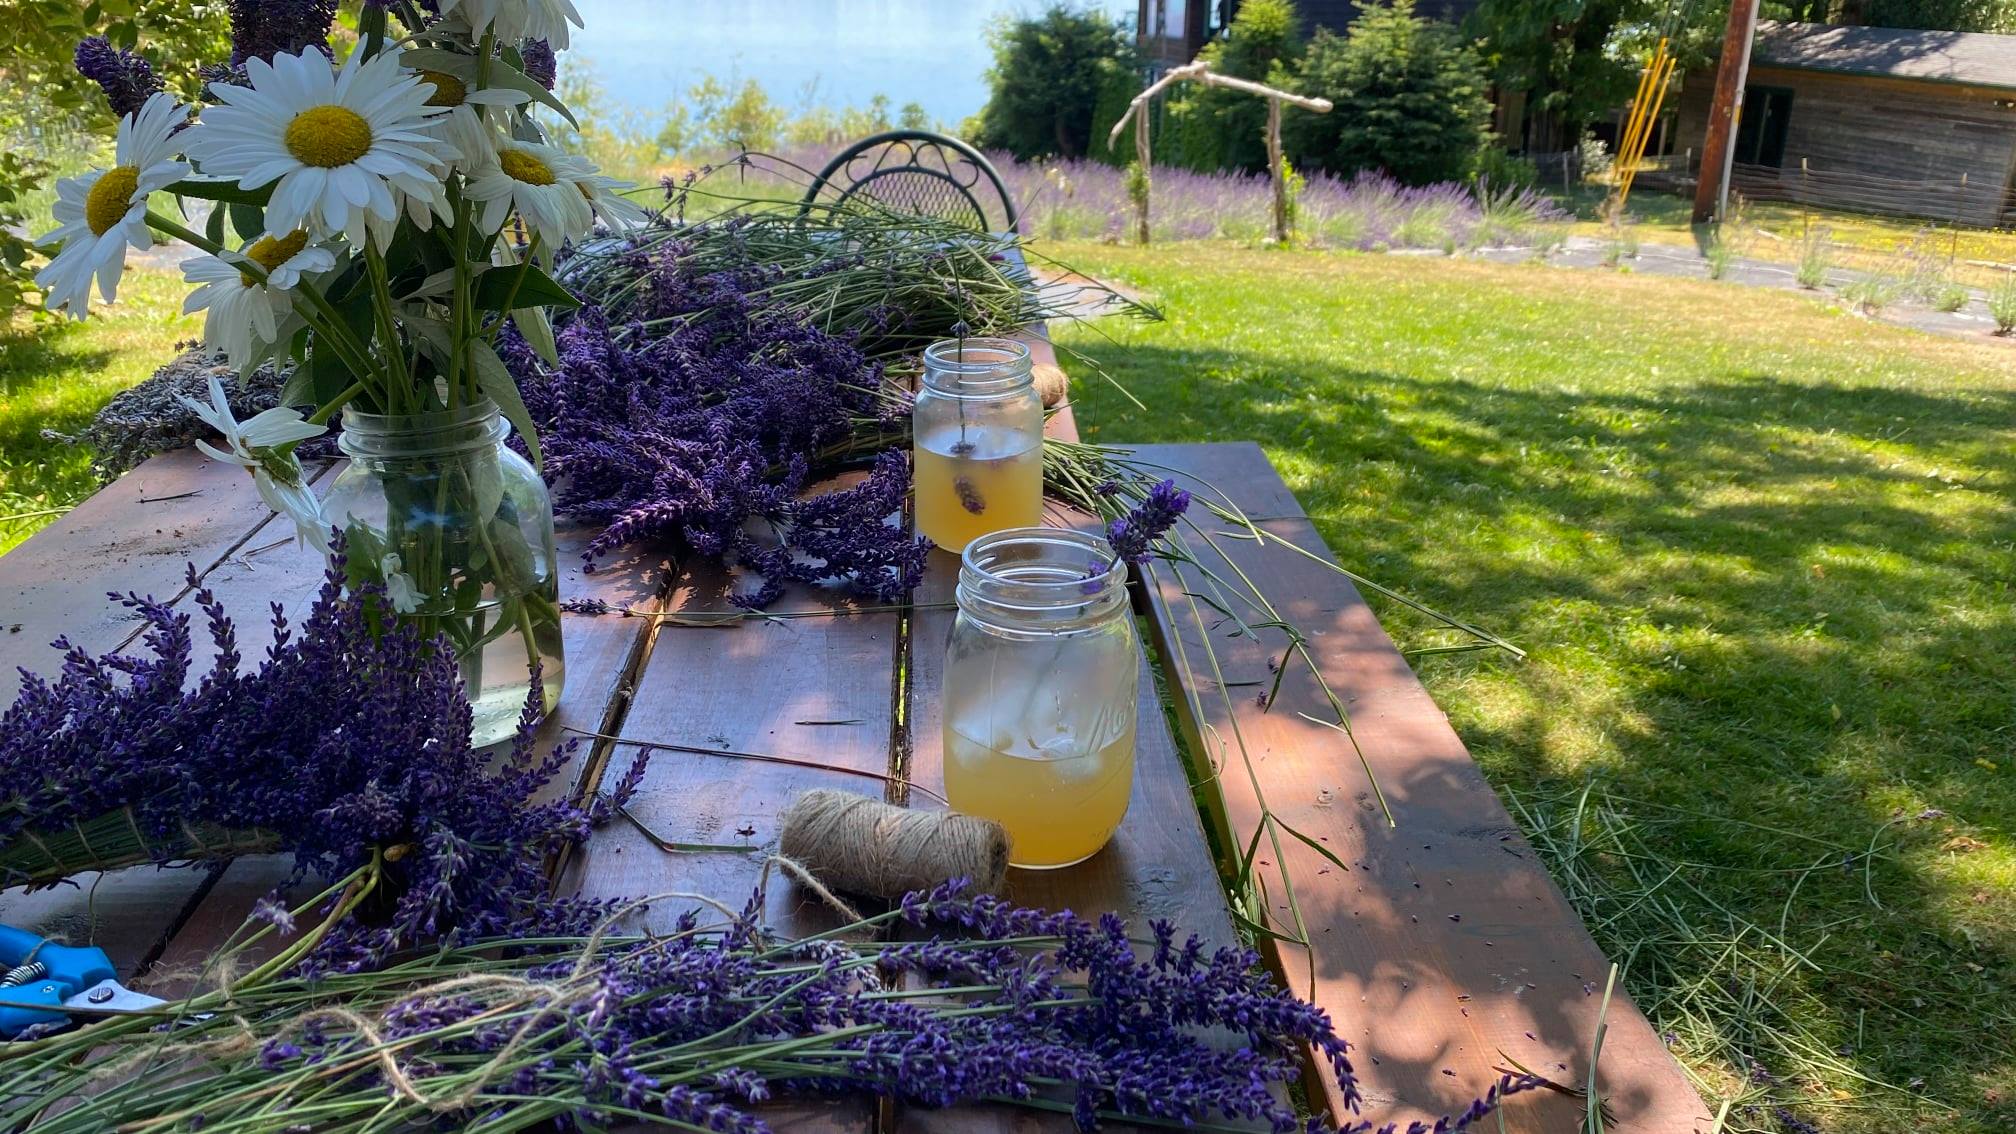 picnic table with lavender bunches and wreath making supplies like ribbon at  Schirm Loop Homestead Lavender Farm